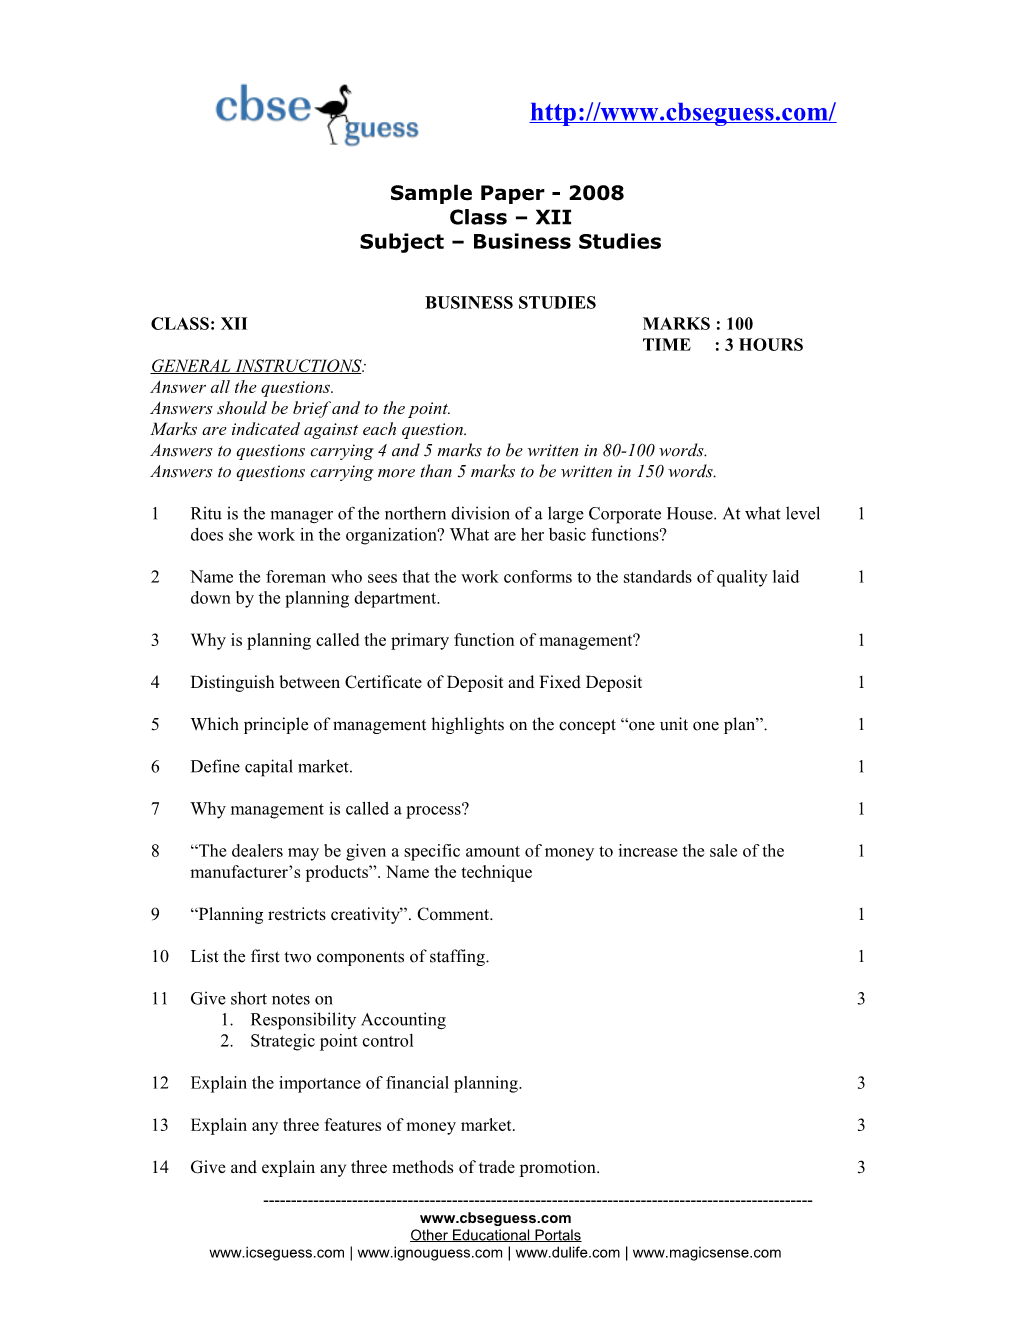 Sample Paper - 2008 Class XII Subject Business Studies